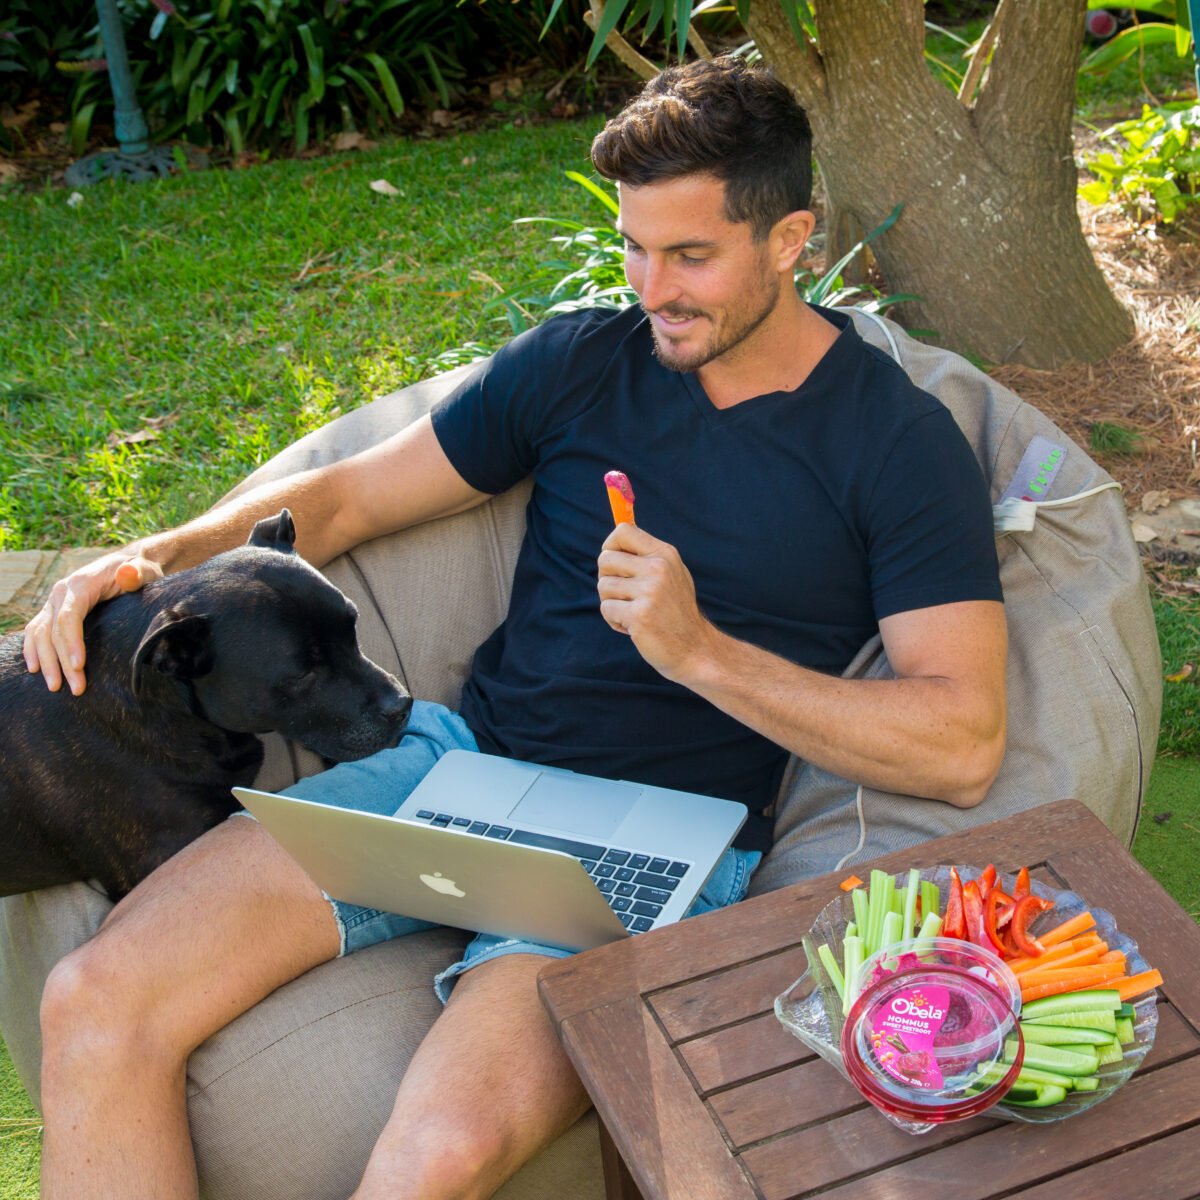 Drew Harrisberg sitting in the garden with his dog and eating a carrot stick